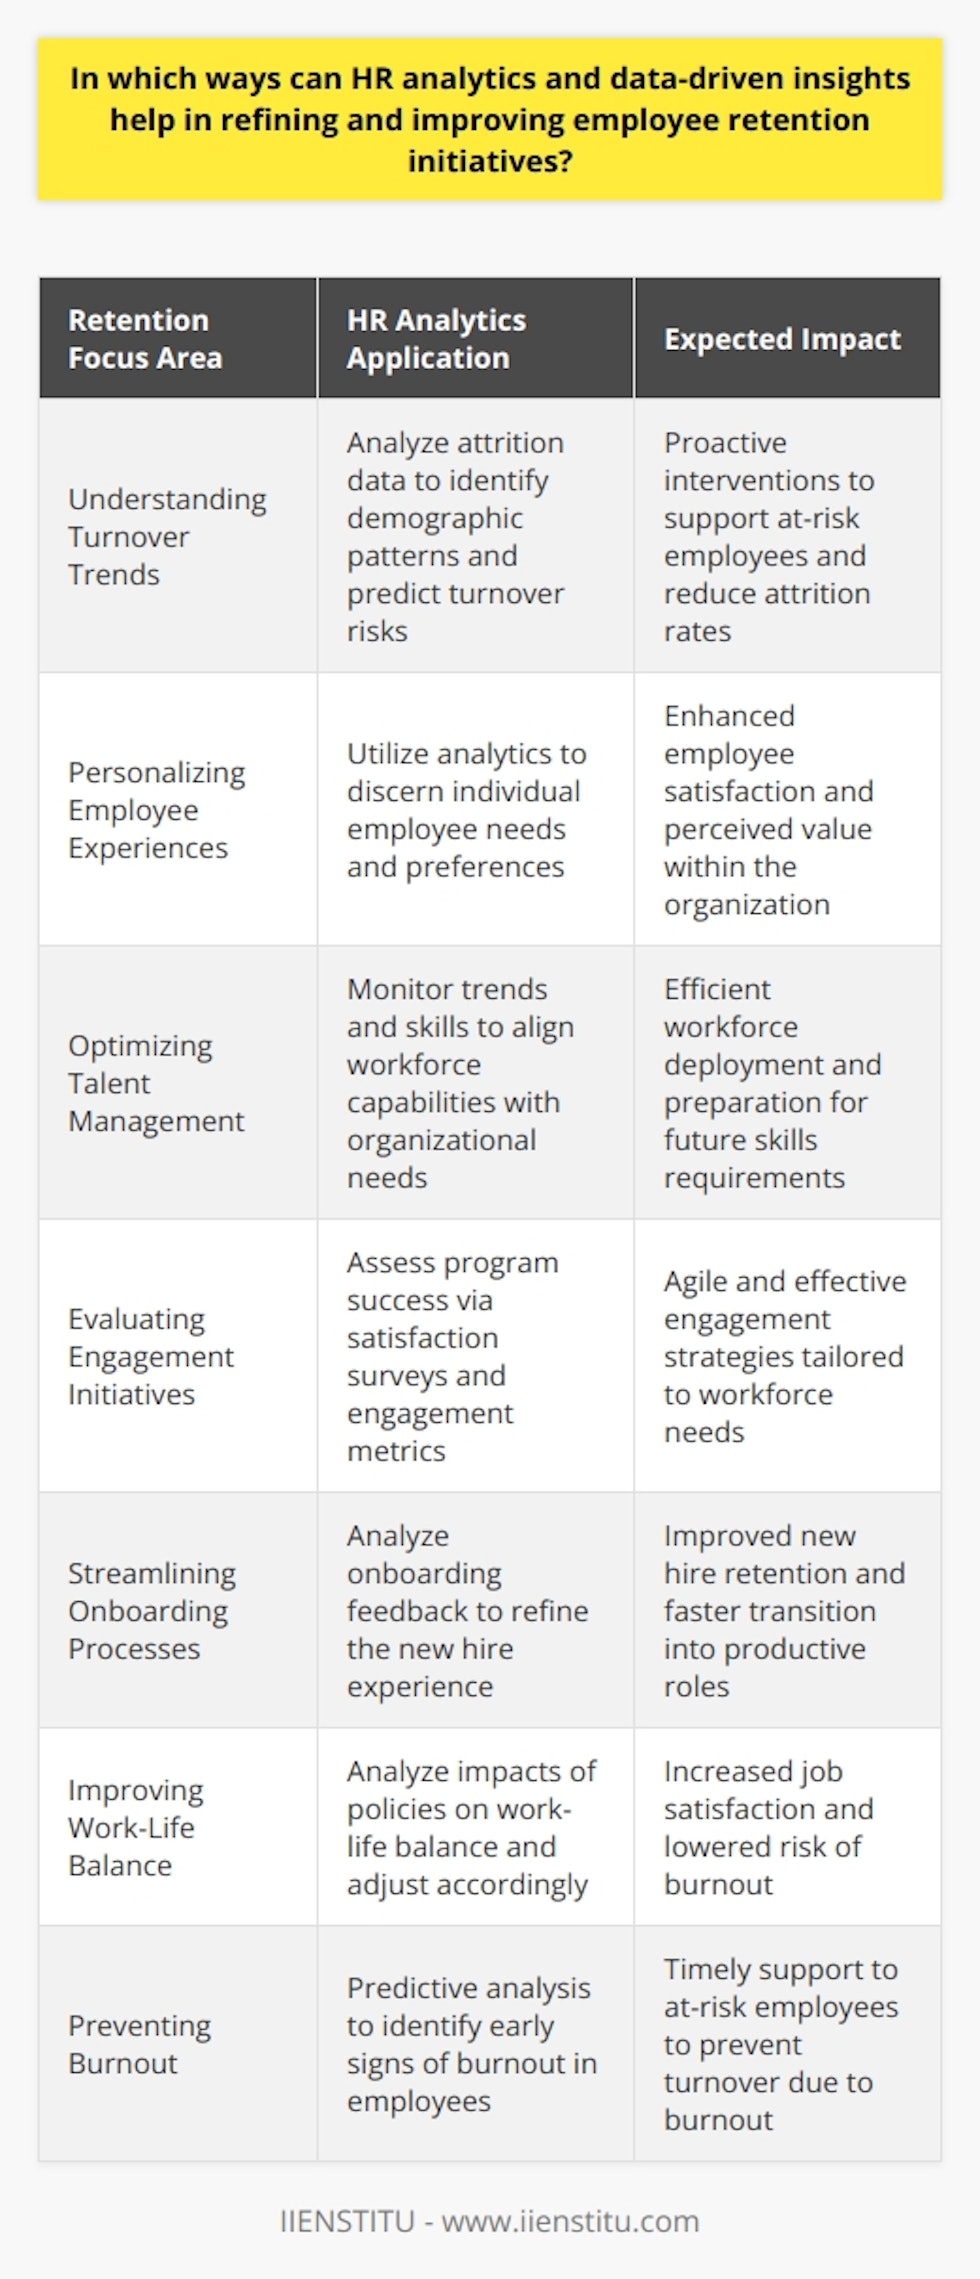 Employing HR analytics and data-driven insights can substantially enrich employee retention strategies by delivering concrete evidence that guides decision-making and informs policy adjustments. Advanced data analysis uncovers hidden patterns and provides a nuanced understanding of workforce dynamics. Here are specific ways in which analytics can illuminate and enhance retention initiatives:**Understanding Turnover Trends:**A deep dive into attrition data helps organizations spot trends and understand the demographics of those leaving - is it new hires, tenured employees, or a specific department that's affected? By forecasting potential turnover risks, HR can intervene proactively, providing additional support or addressing concerns that might lead to disengagement.**Personalizing Employee Experiences:**Data enables a personalized approach to employee management. Analytics can reveal individual preferences, aspirations, and areas of strength or needed development among the workforce. With this knowledge, HR departments can tailor personal development plans and identify opportunities for each employee, improving satisfaction and their sense of value within the company.**Optimizing Talent Management:**Companies can use HR analytics to manage talent effectively. By observing workforce trends and skills inventories, it's possible to align organizational needs with employee capabilities, thereby orchestrating a more efficient and supportive workplace. Advanced predictive analytics can also forecast future competency gaps, allowing for strategic hiring and training.**Evaluating Engagement Initiatives:**Through satisfaction surveys and engagement metrics, HR analytics assess the effectiveness of current initiatives. Regular, data-enabled assessments keep a pulse on what's working and what's not, ensuring that engagement strategies are agile and responsive to the actual needs and preferences of the workforce.**Streamline Onboarding Processes:**Analyzing data from onboarding experiences can help HR teams fine-tune these processes to ensure that new hires feel welcomed, informed, and prepared. A smooth onboarding process can significantly enhance employee retention, making this a critical area for analysis.**Improving Work-Life Balance:**Data-driven insights can also shine light on work-life balance, revealing if certain policies are leading to burnout or decreased productivity. By adjusting work schedules, remote work opportunities, and leave policies based on analytics, companies can greatly improve job satisfaction and retention.**Preventing Burnout:**Predictive analytics can alert to signs of employee burnout before it leads to turnover. Monitoring work hours, performance, and engagement levels, HR can identify employees who might be at risk and take steps to alleviate stressors.Ultimately, the effective use of HR analytics and data-driven insights curates a workspace where every employee feels understood and valued, significantly boosting overall retention. Moreover, it enables HR professionals to move from reactive to strategic positions, forecasting future trends, and preparing the organization accordingly. By embracing a data-centric approach to HR, institutions such as IIENSTITU can demonstrate leadership in cultivating an advanced, supportive, and resilient workplace culture.